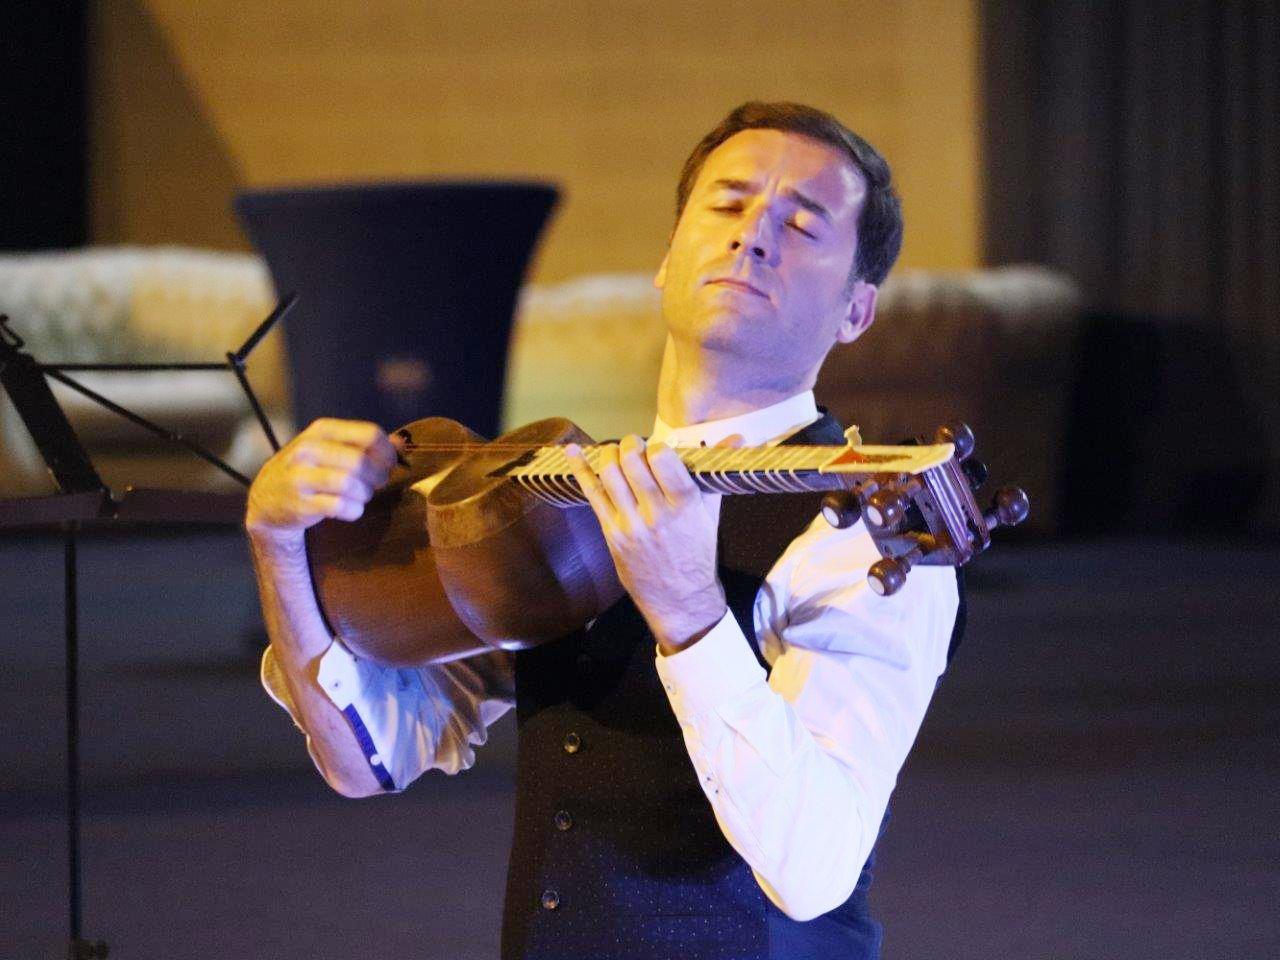 National tar musician awarded in France [VIDEO] - Gallery Image